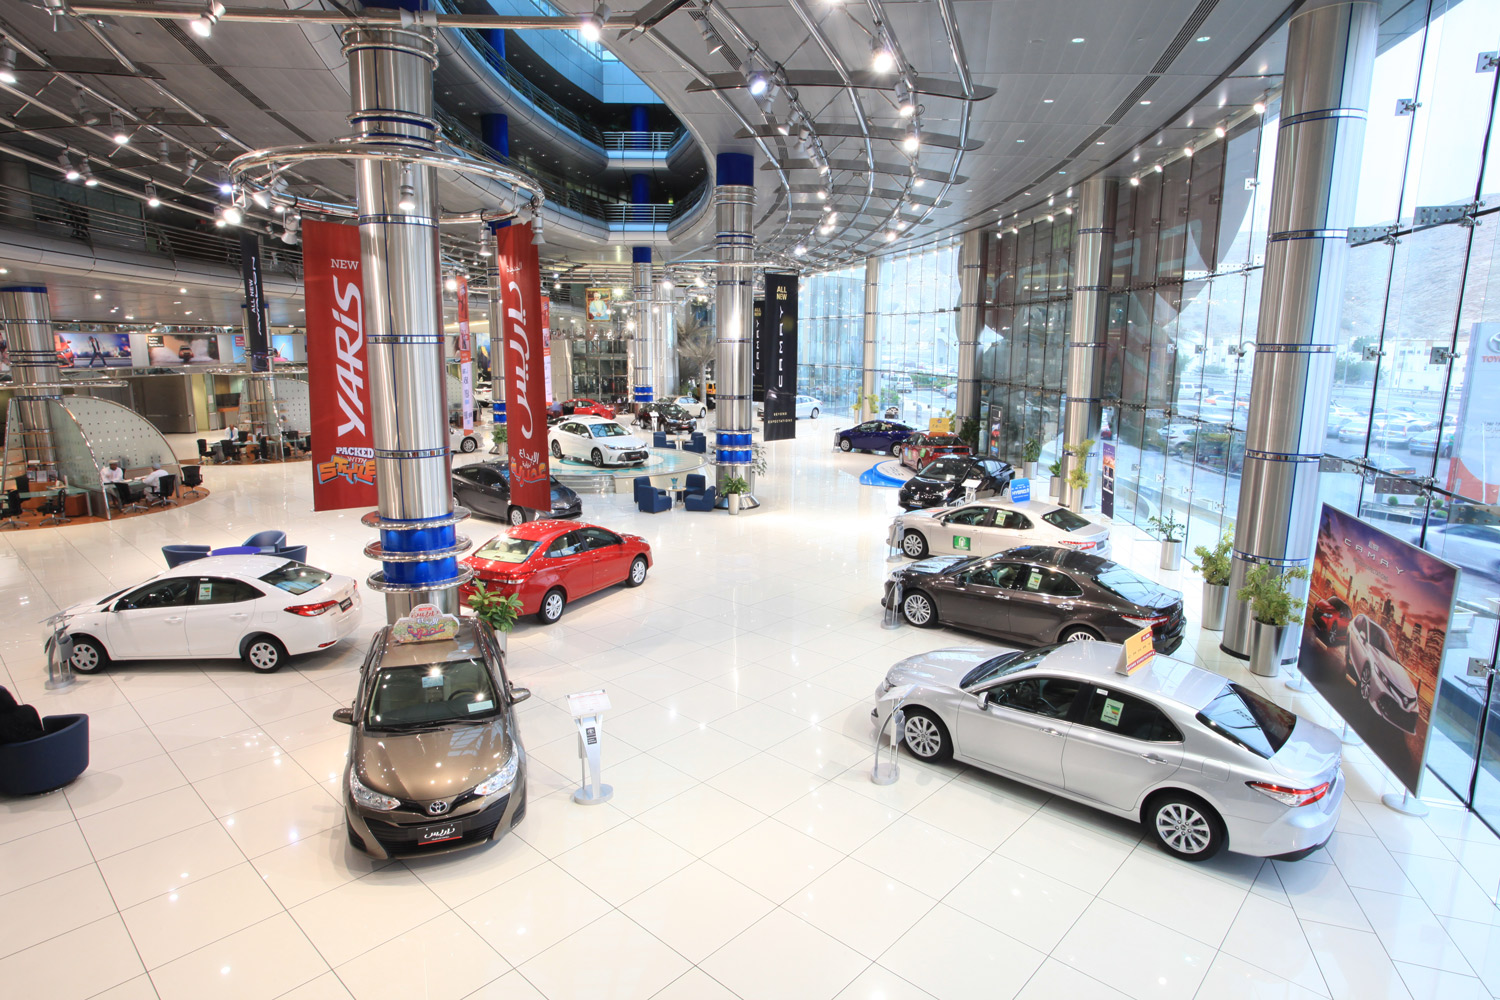 Inside view of Saud Bahwan's showroom showcasing different automotive brands